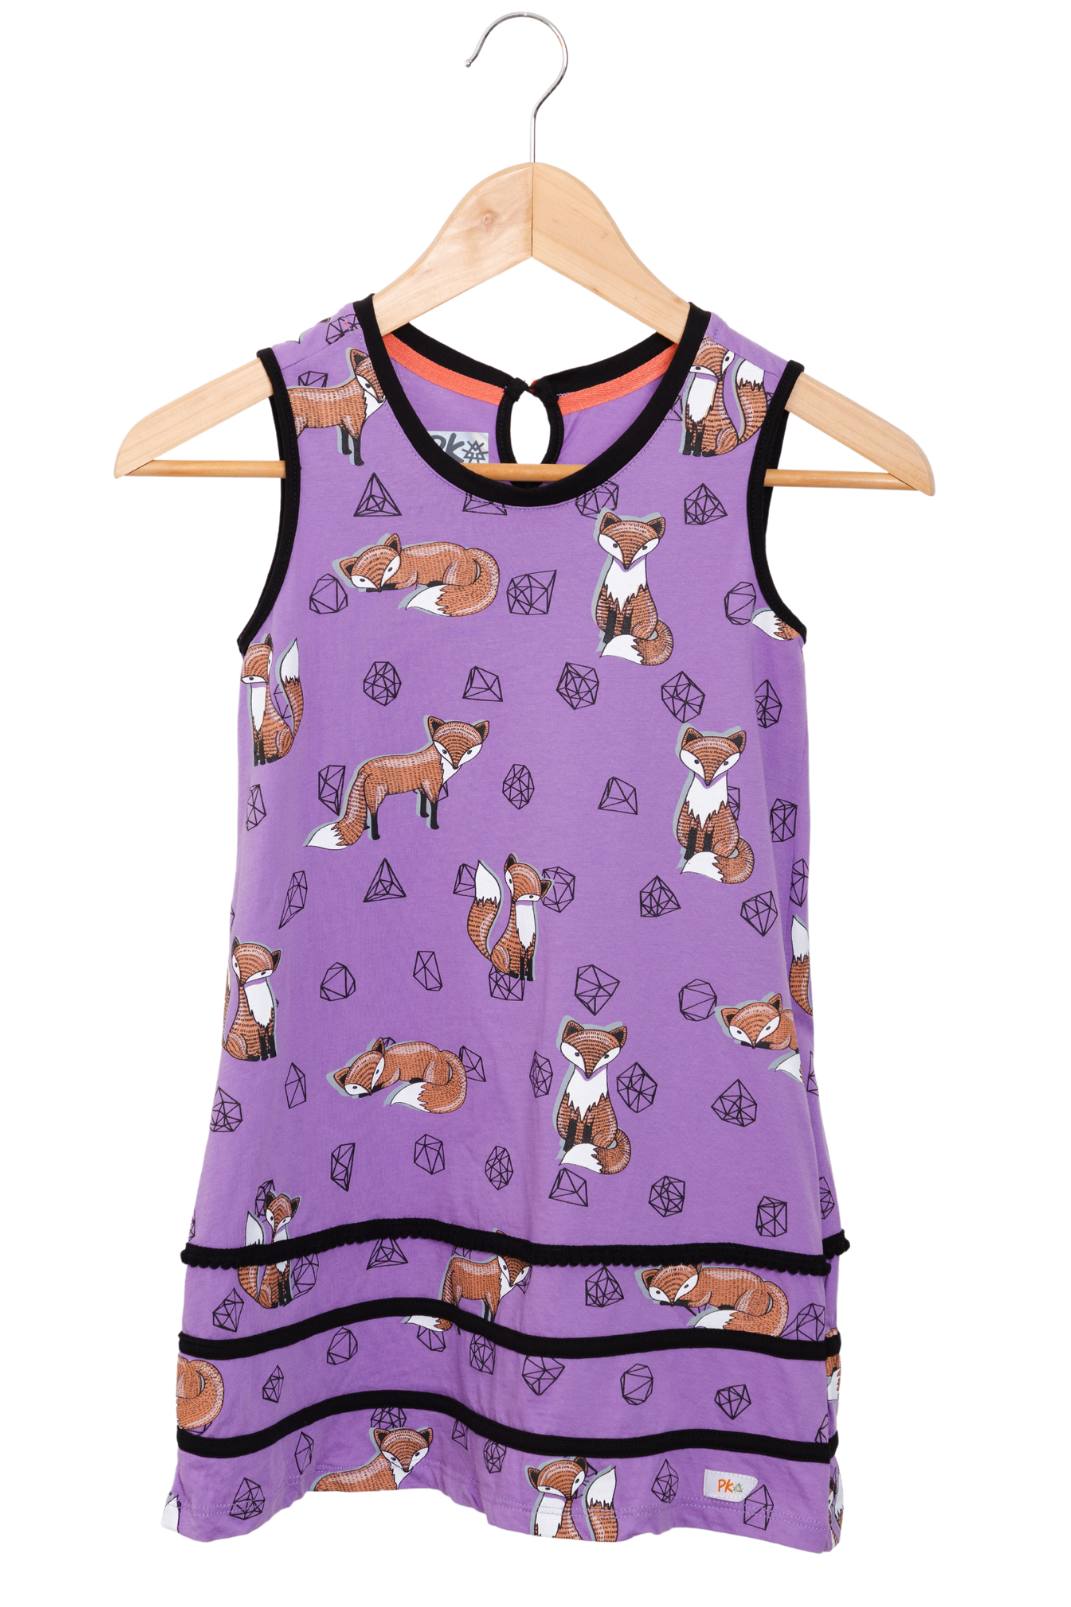 Purple fox girl dress, non-stereotypical style with pockets, durable clothing, girl dress - Prisma Kiddos